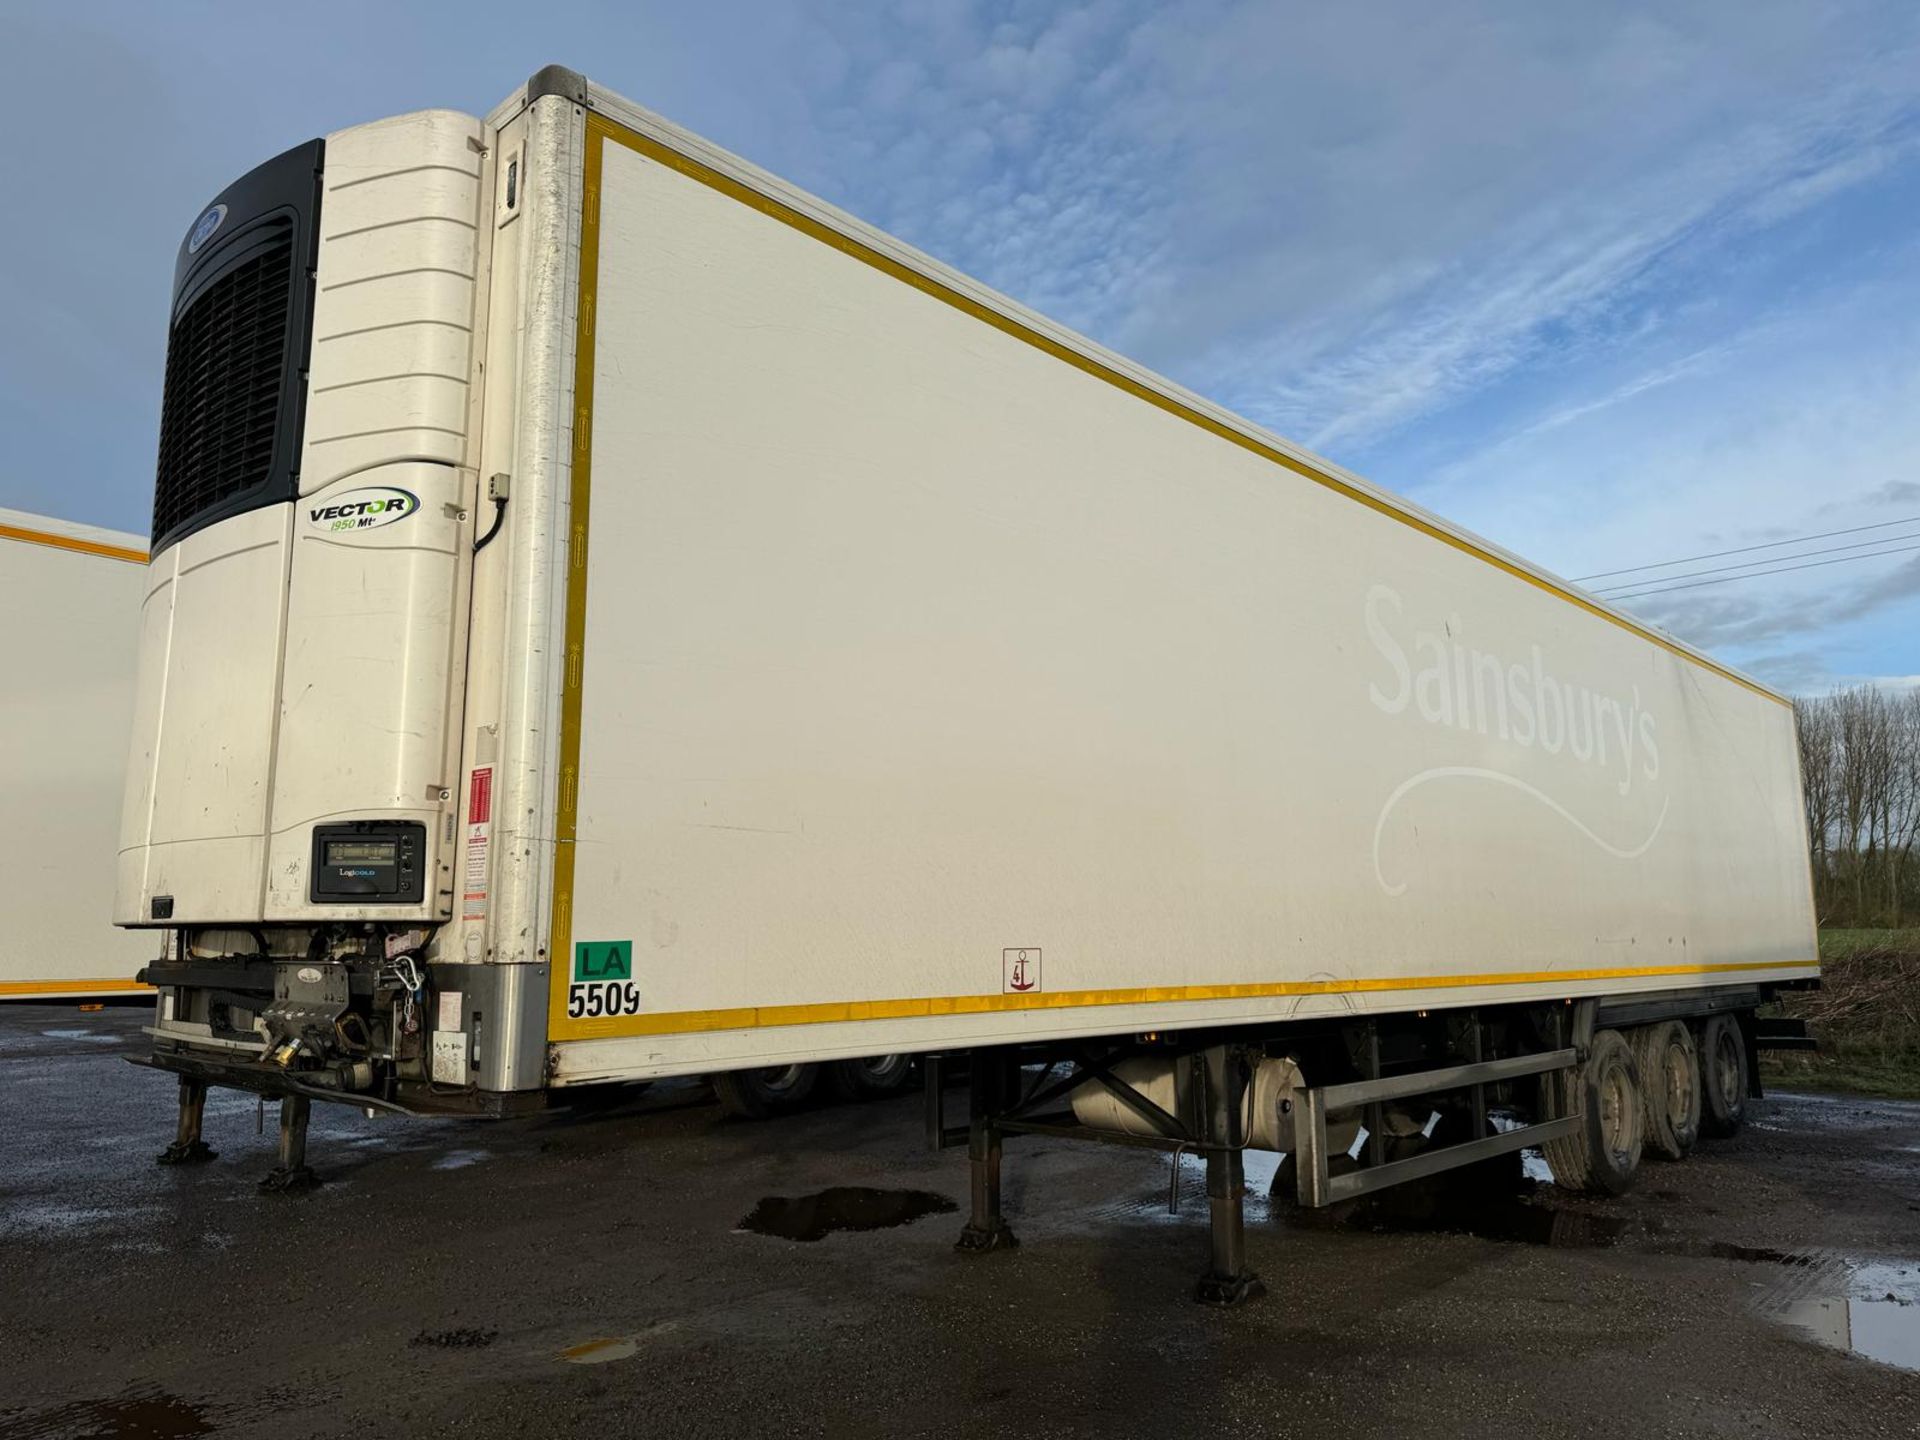 5509 – 2014 Montracon 13.6m Refrigerated Trailer